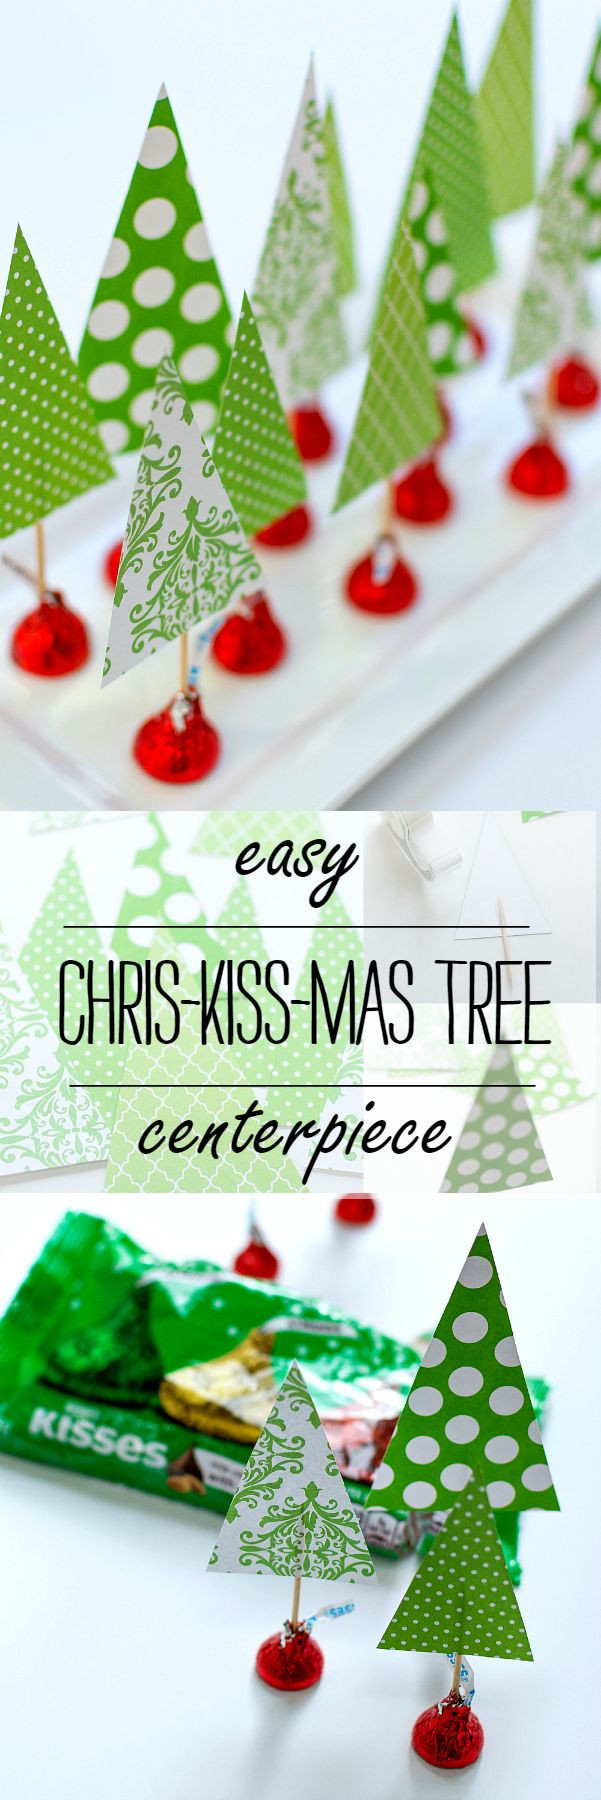 Easy Christmas Party Ideas
 15 best ideas about Holiday Centerpieces on Pinterest